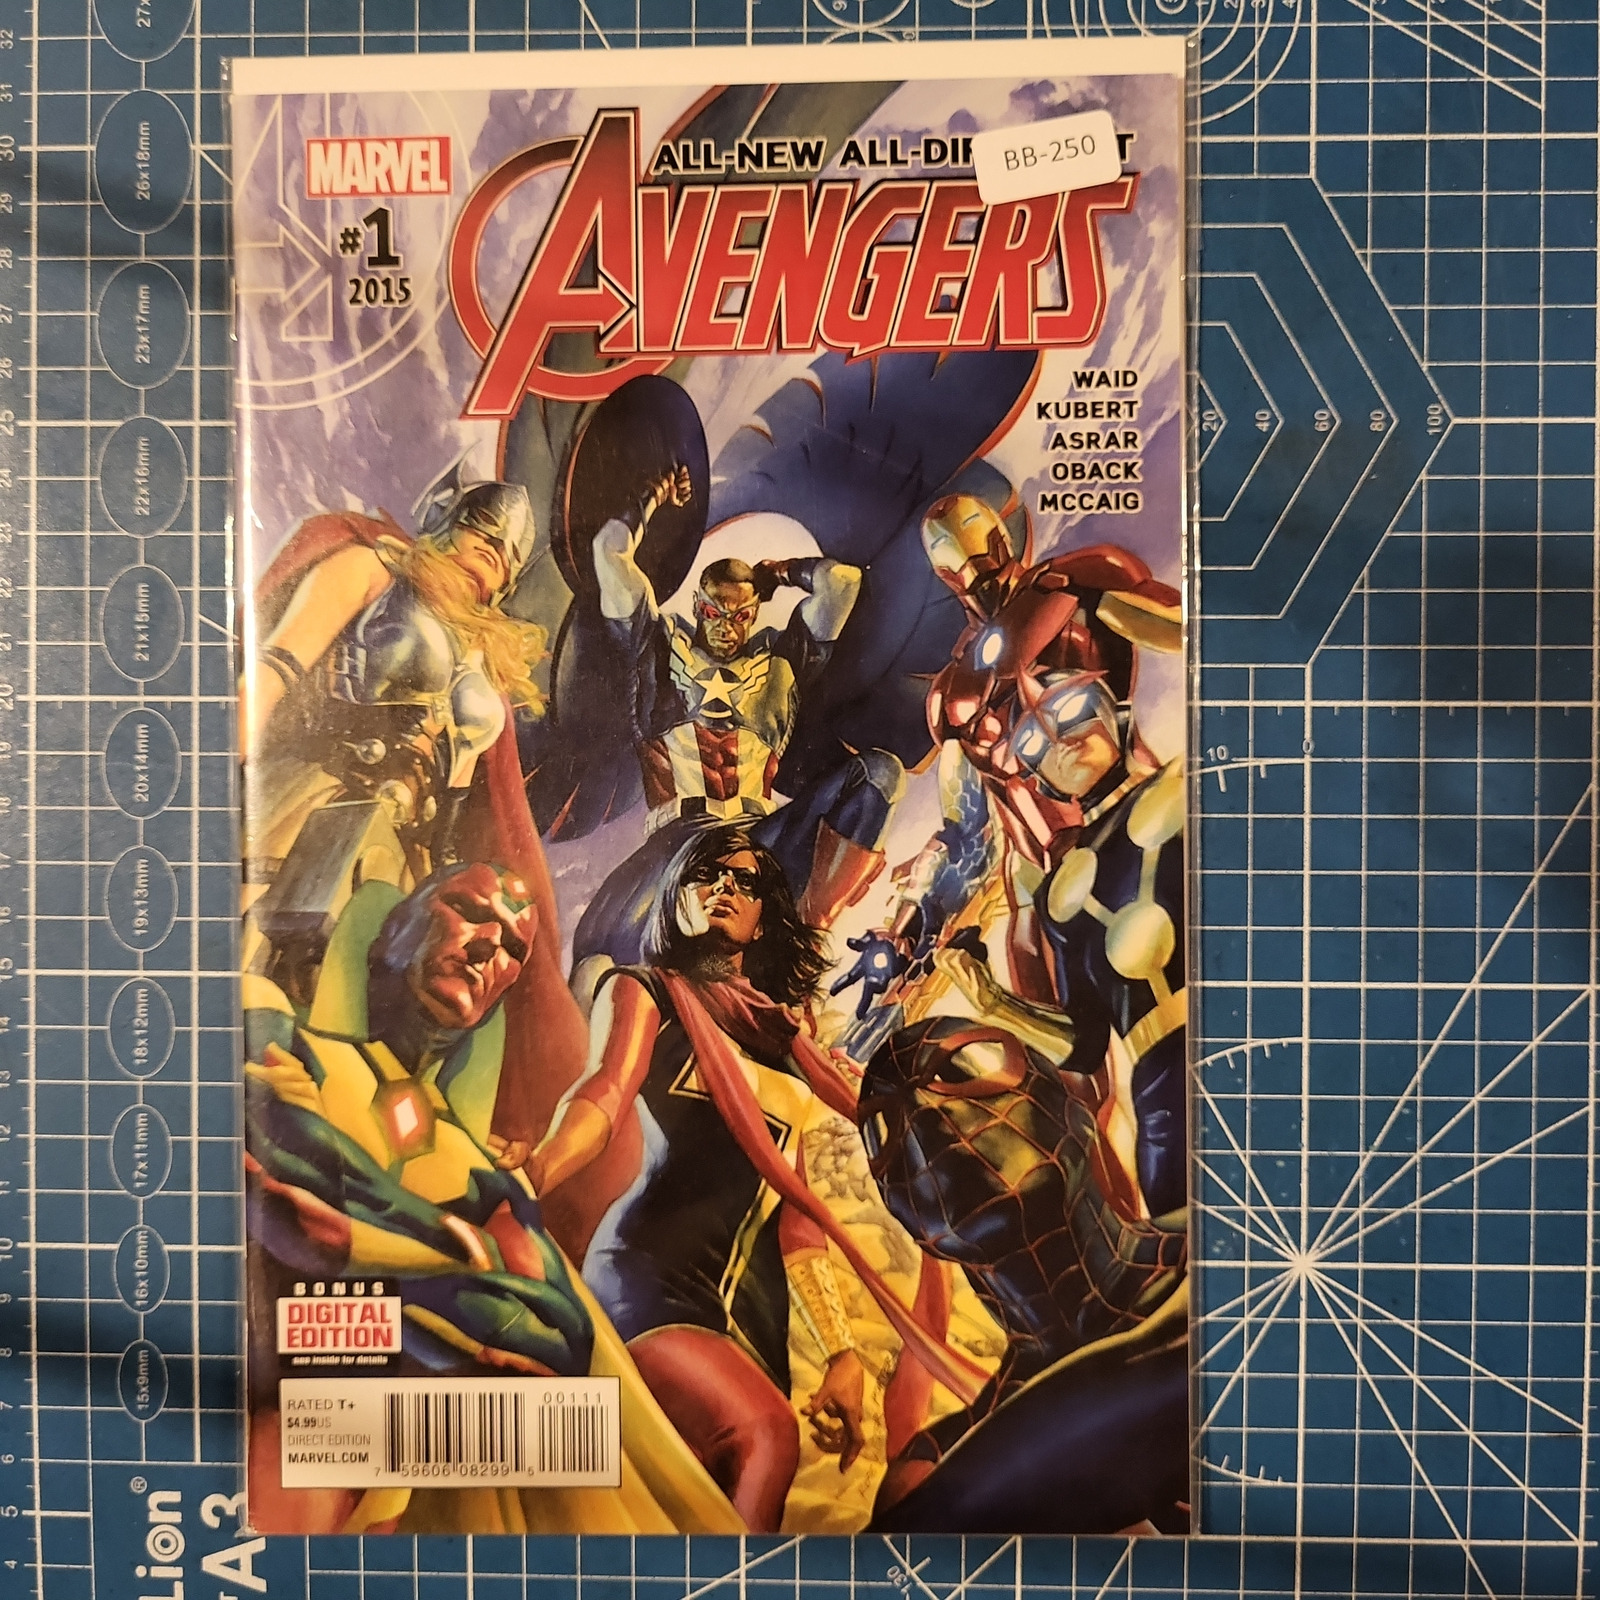 ALL-NEW, ALL-DIFFERENT AVENGERS #1 8.0+ 1ST APP MARVEL COMIC BOOK BB-250